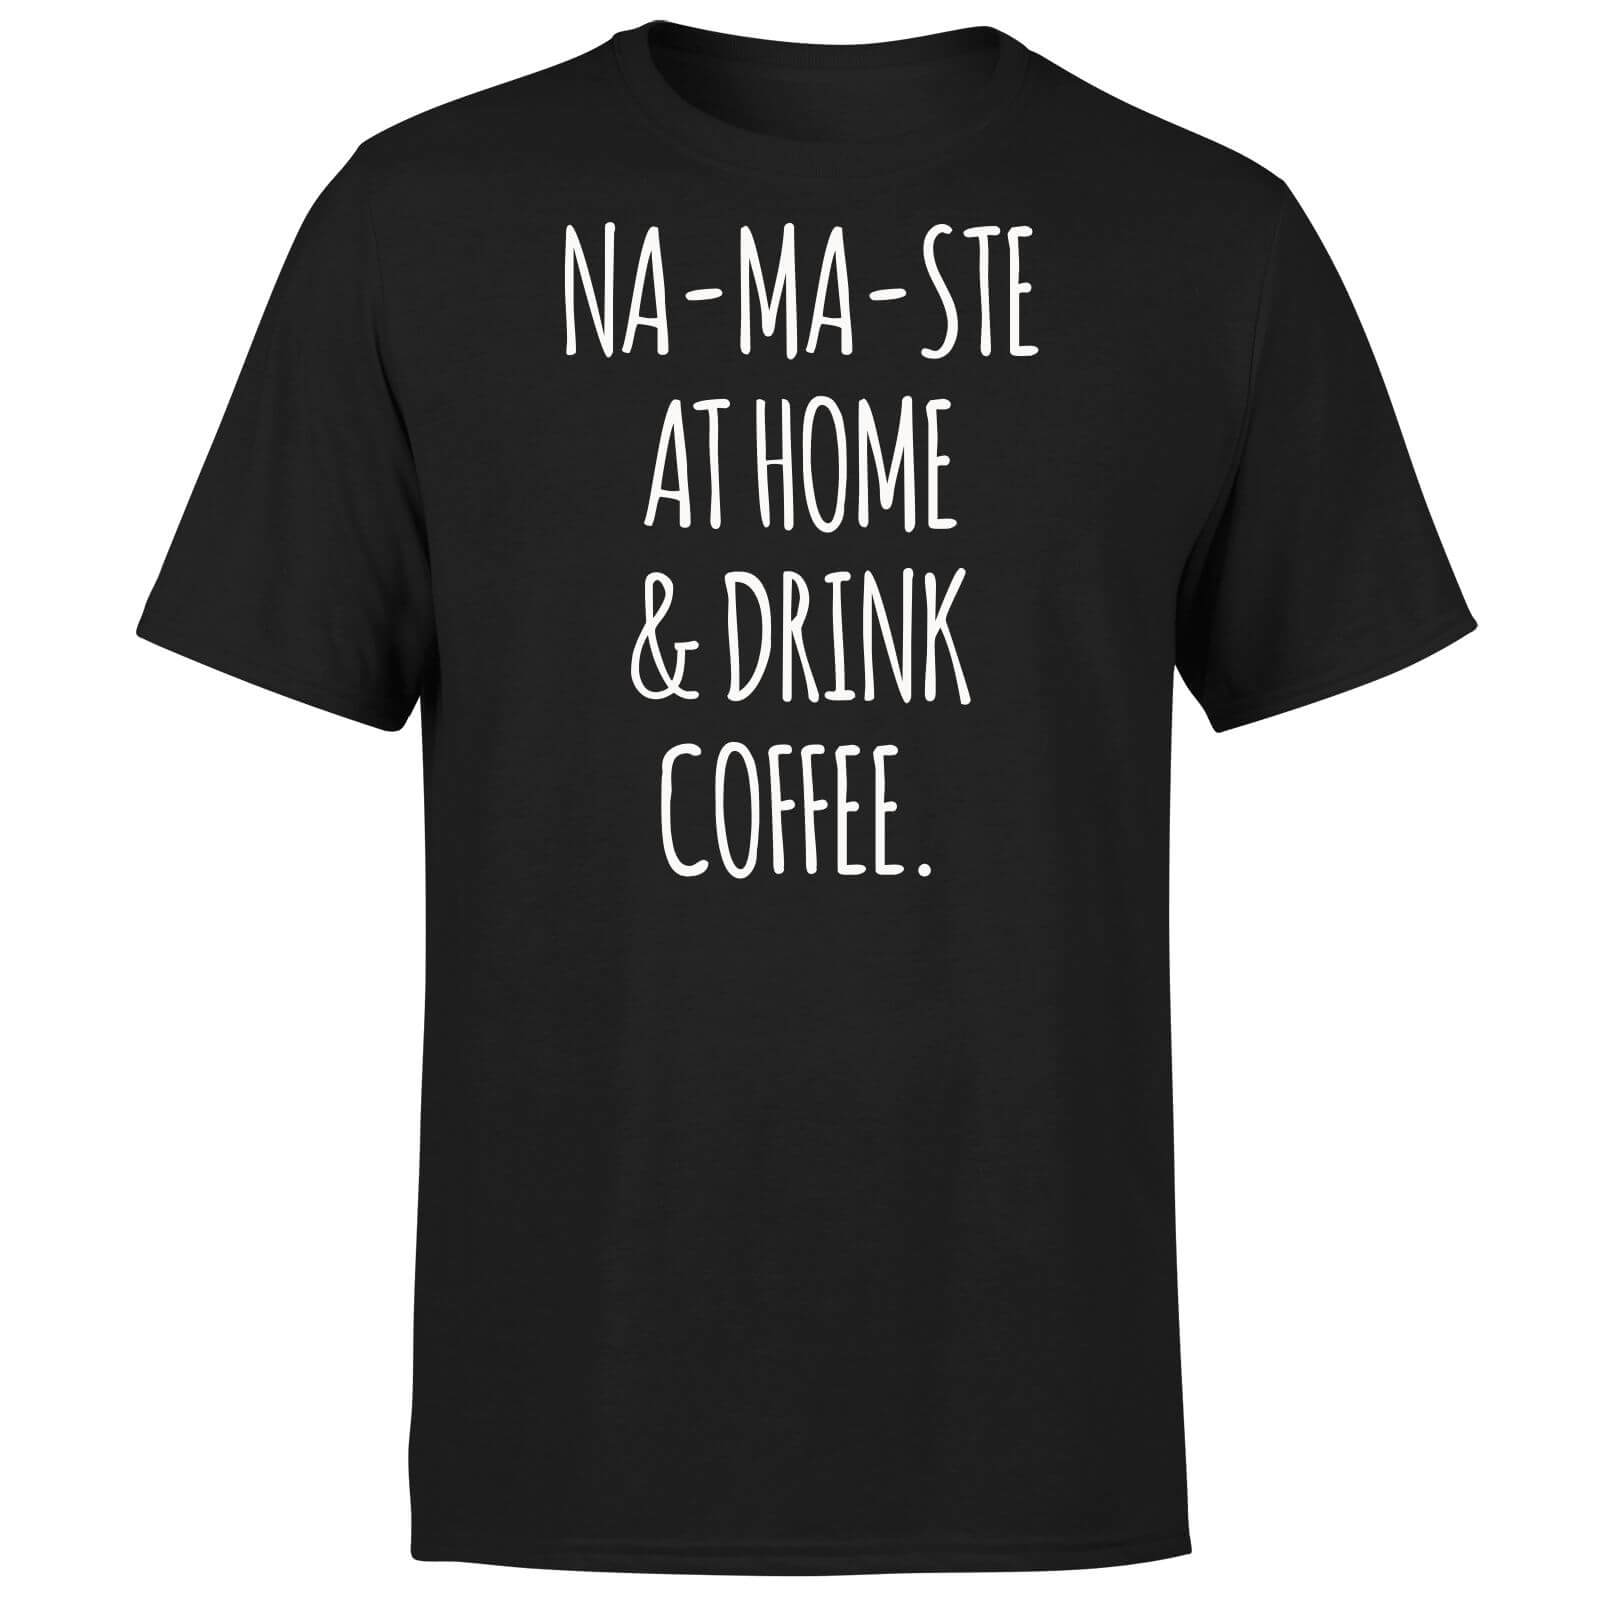 Na-ma-ste at Home and Drink Coffee T-Shirt - Black - S - Black